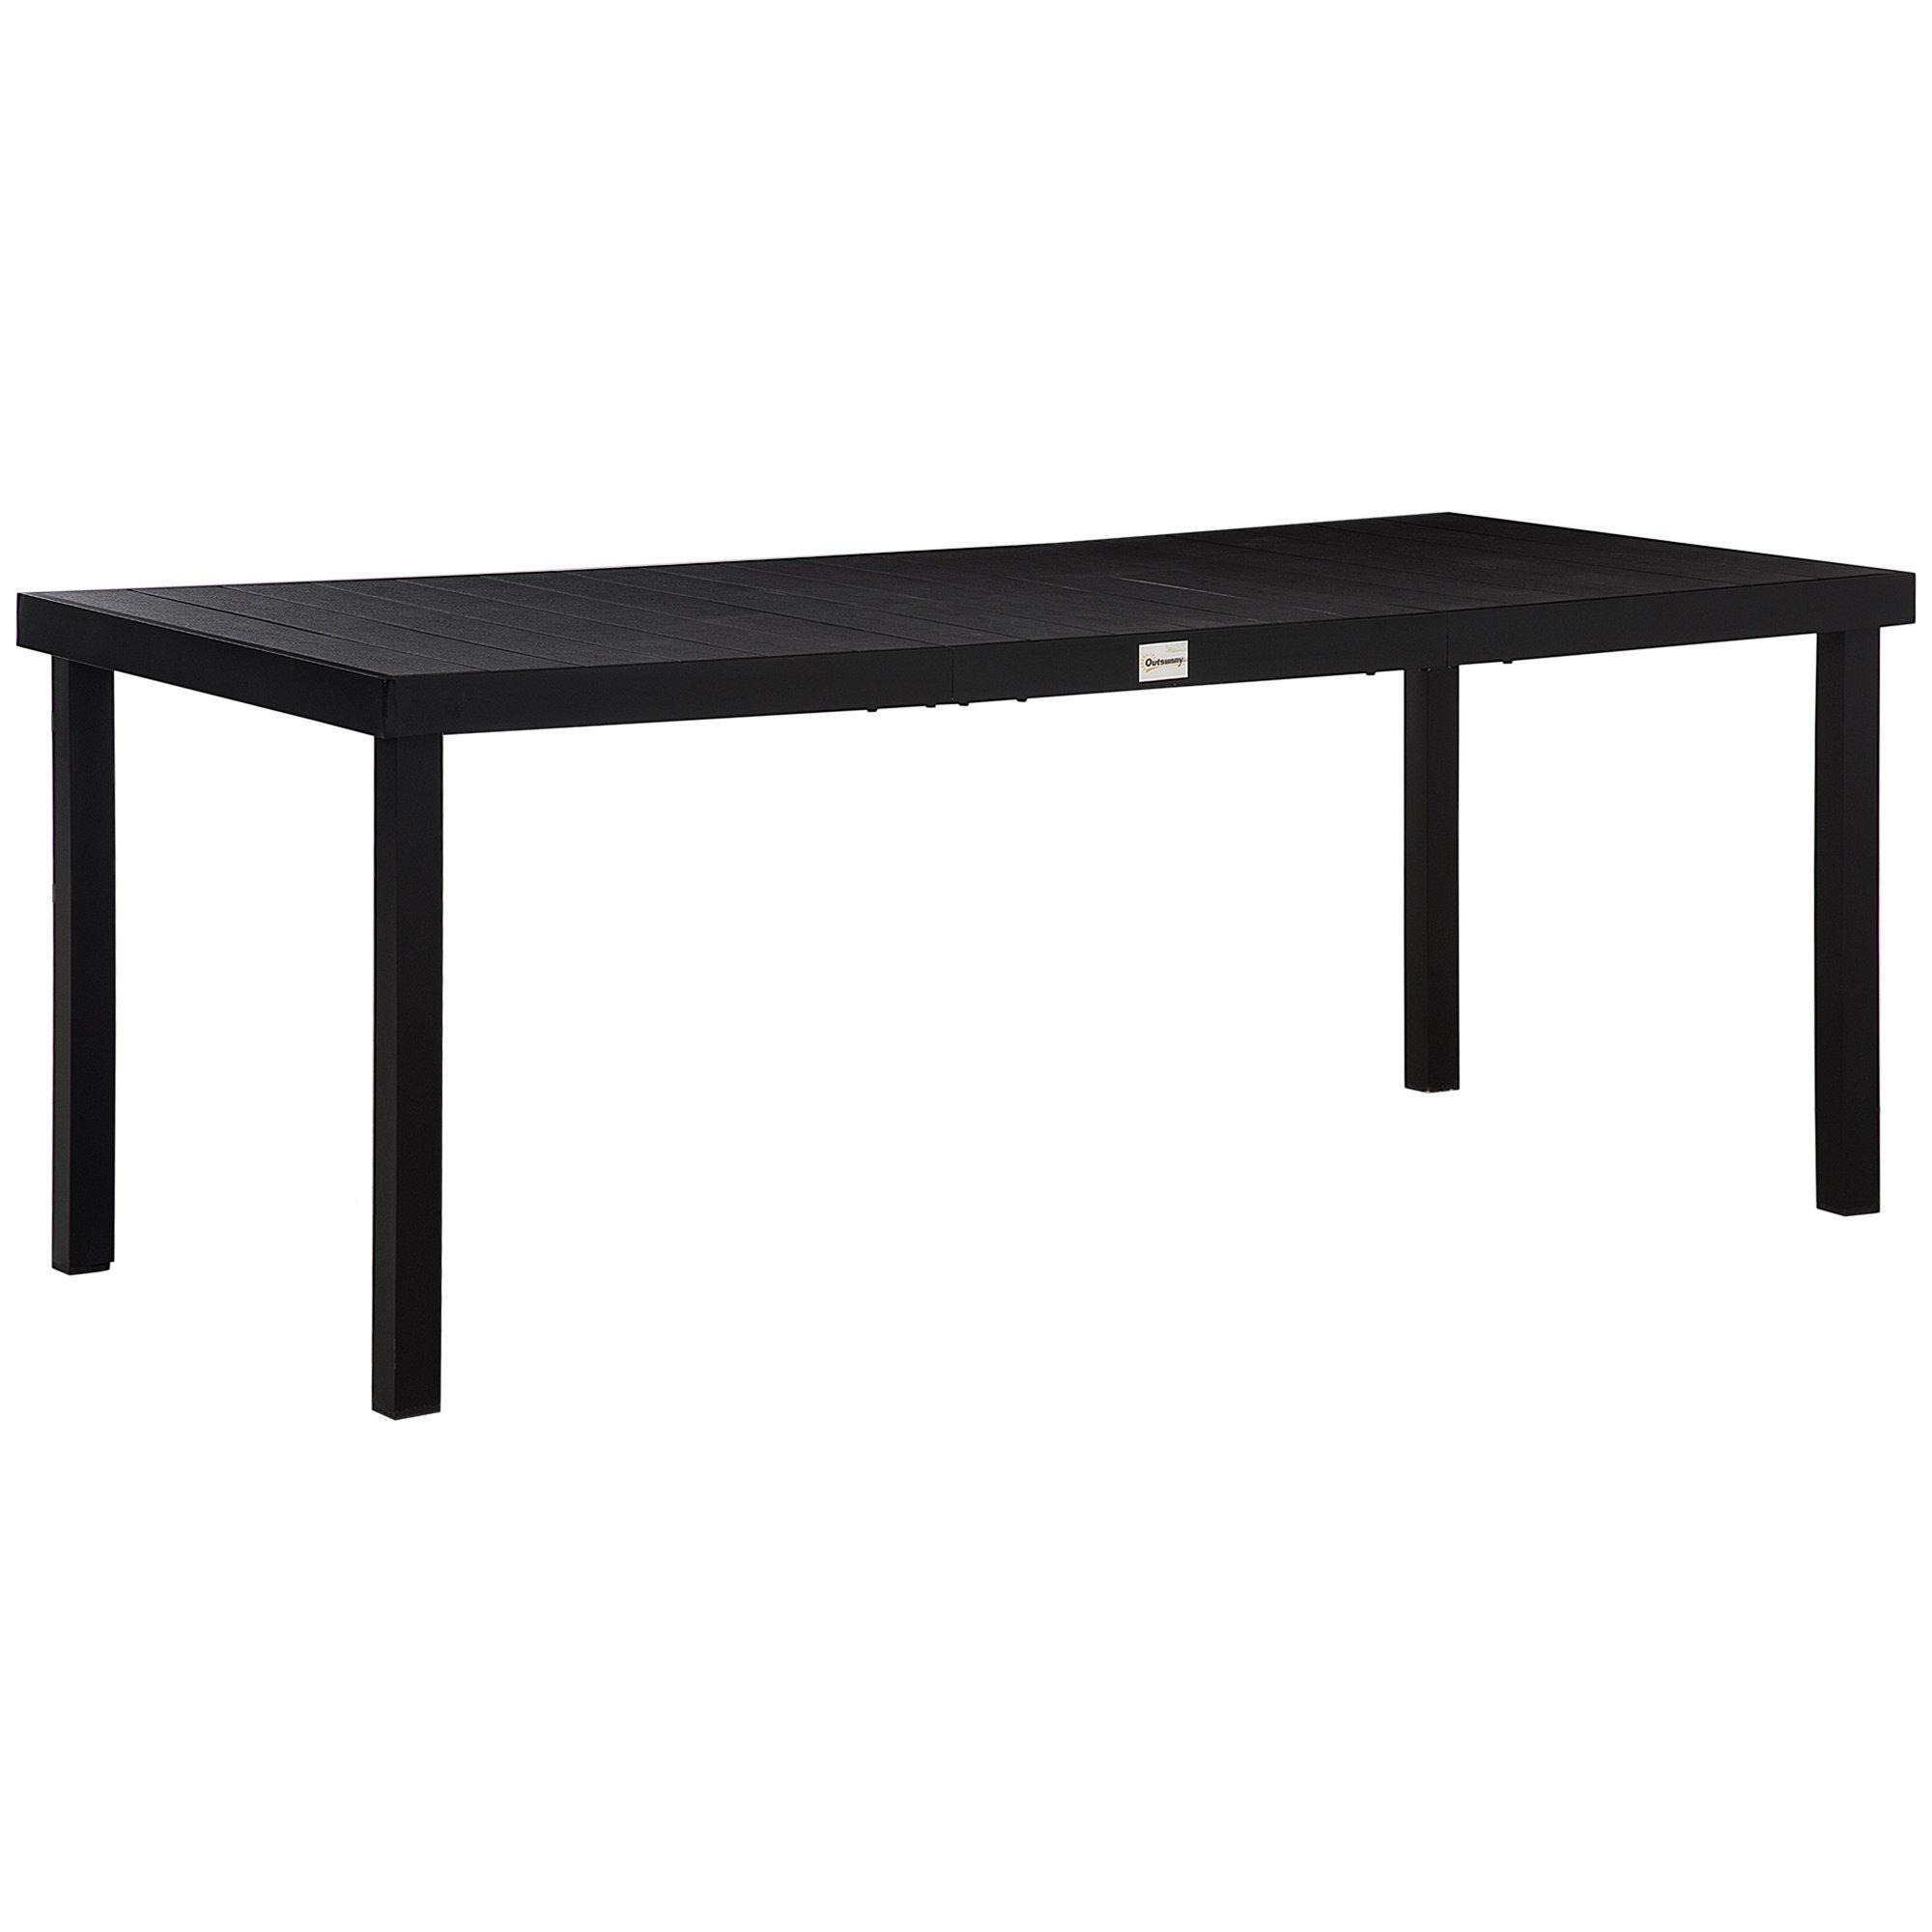 Garden Dining Table for 8, Aluminium Frame for Patio, Lawn - image 1